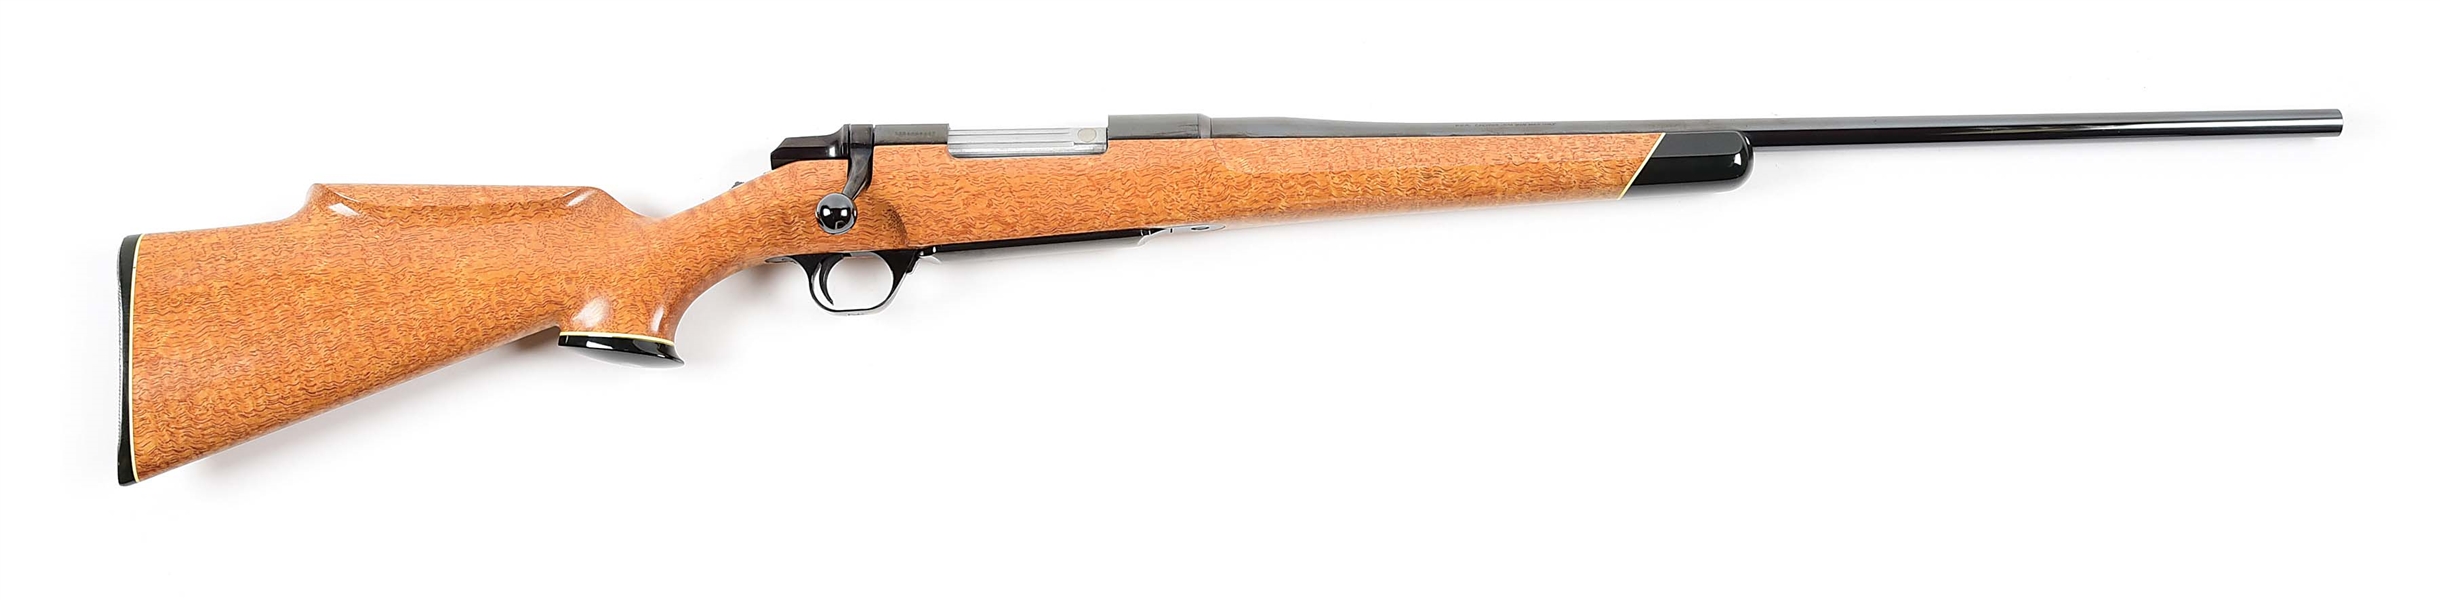 (M) BROWNING BBR BOLT ACTION RIFLE WITH MANGO STOCK.